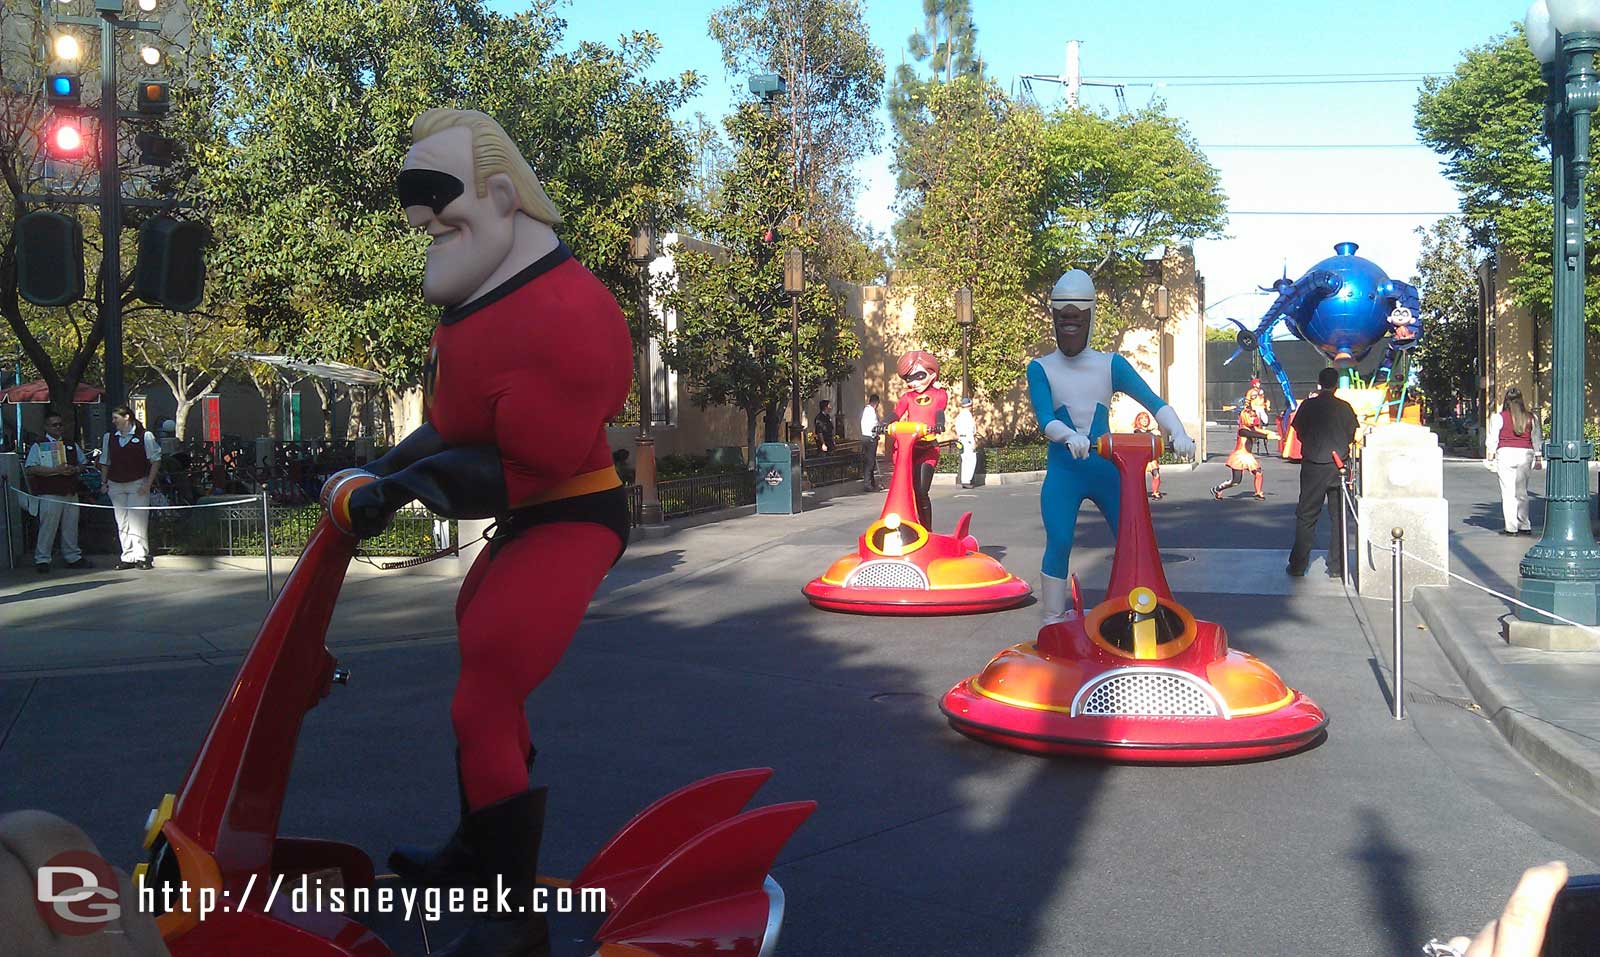 The Incredibles lead off the Pixar Play Parade now.